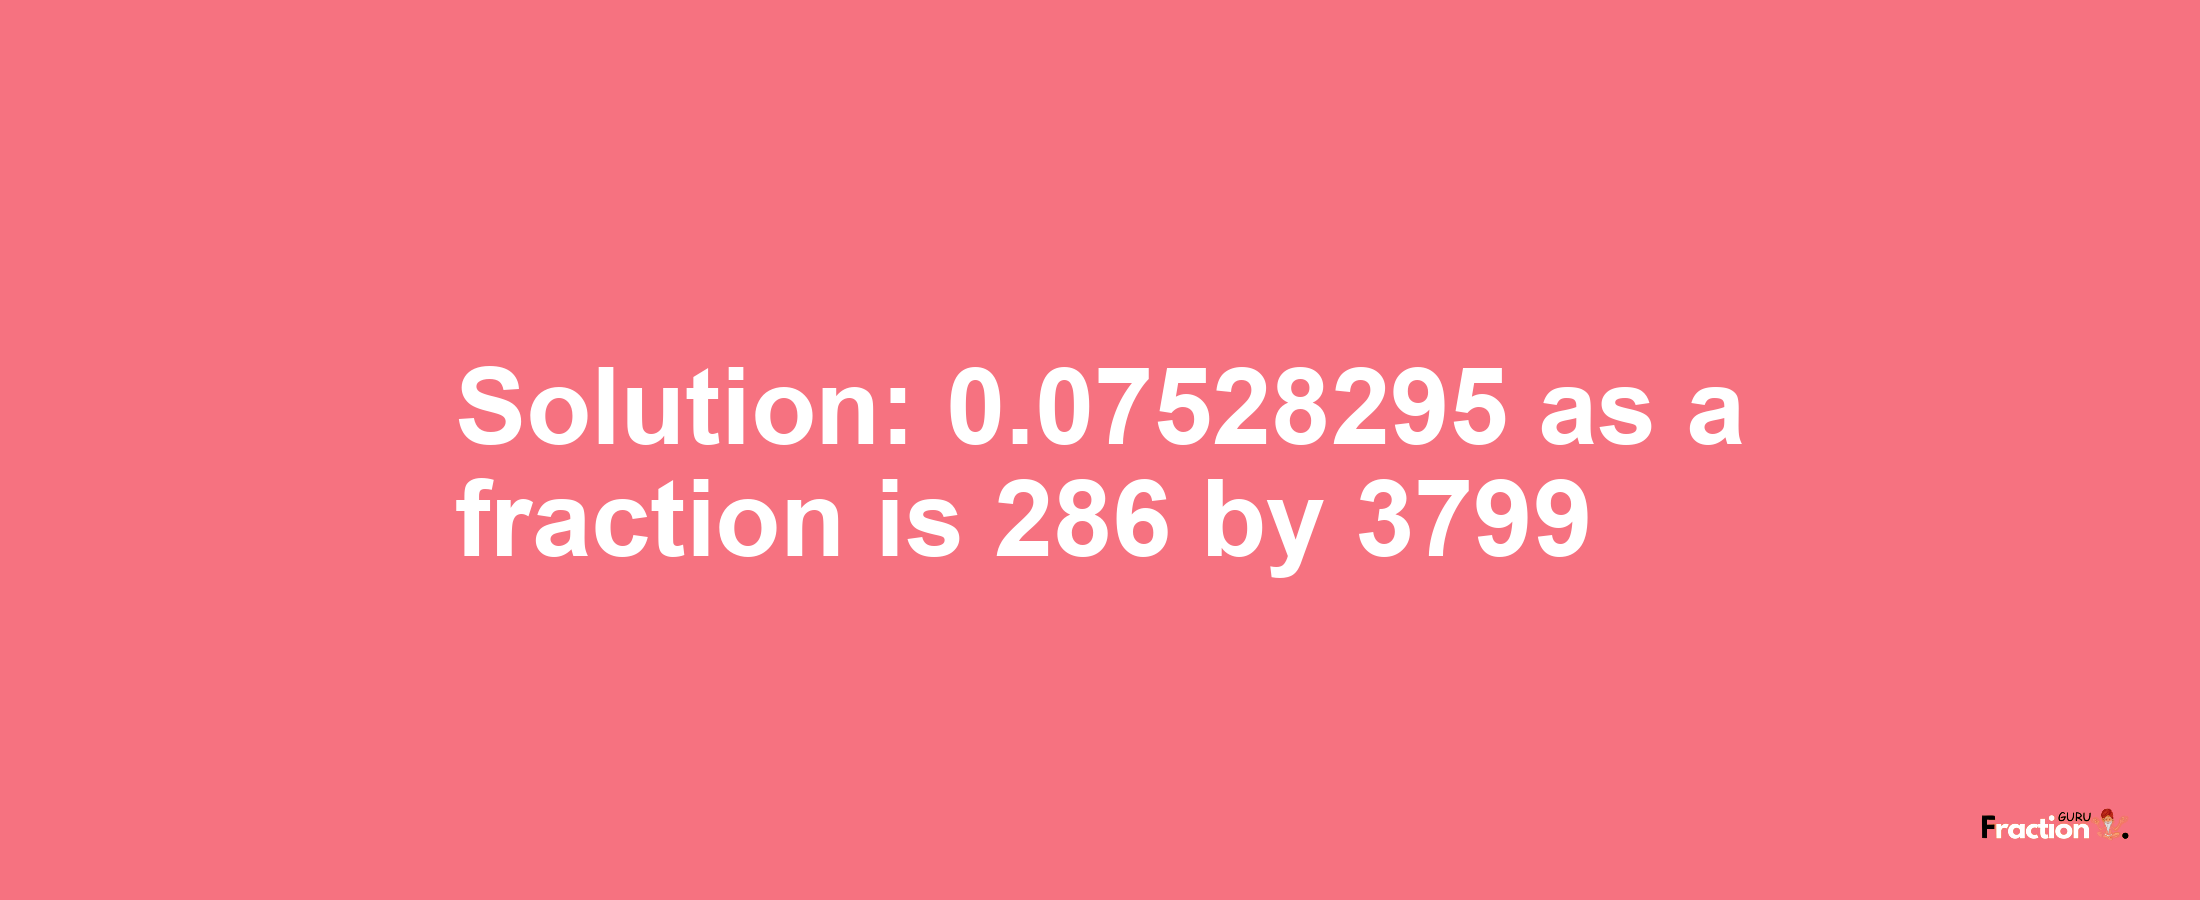 Solution:0.07528295 as a fraction is 286/3799